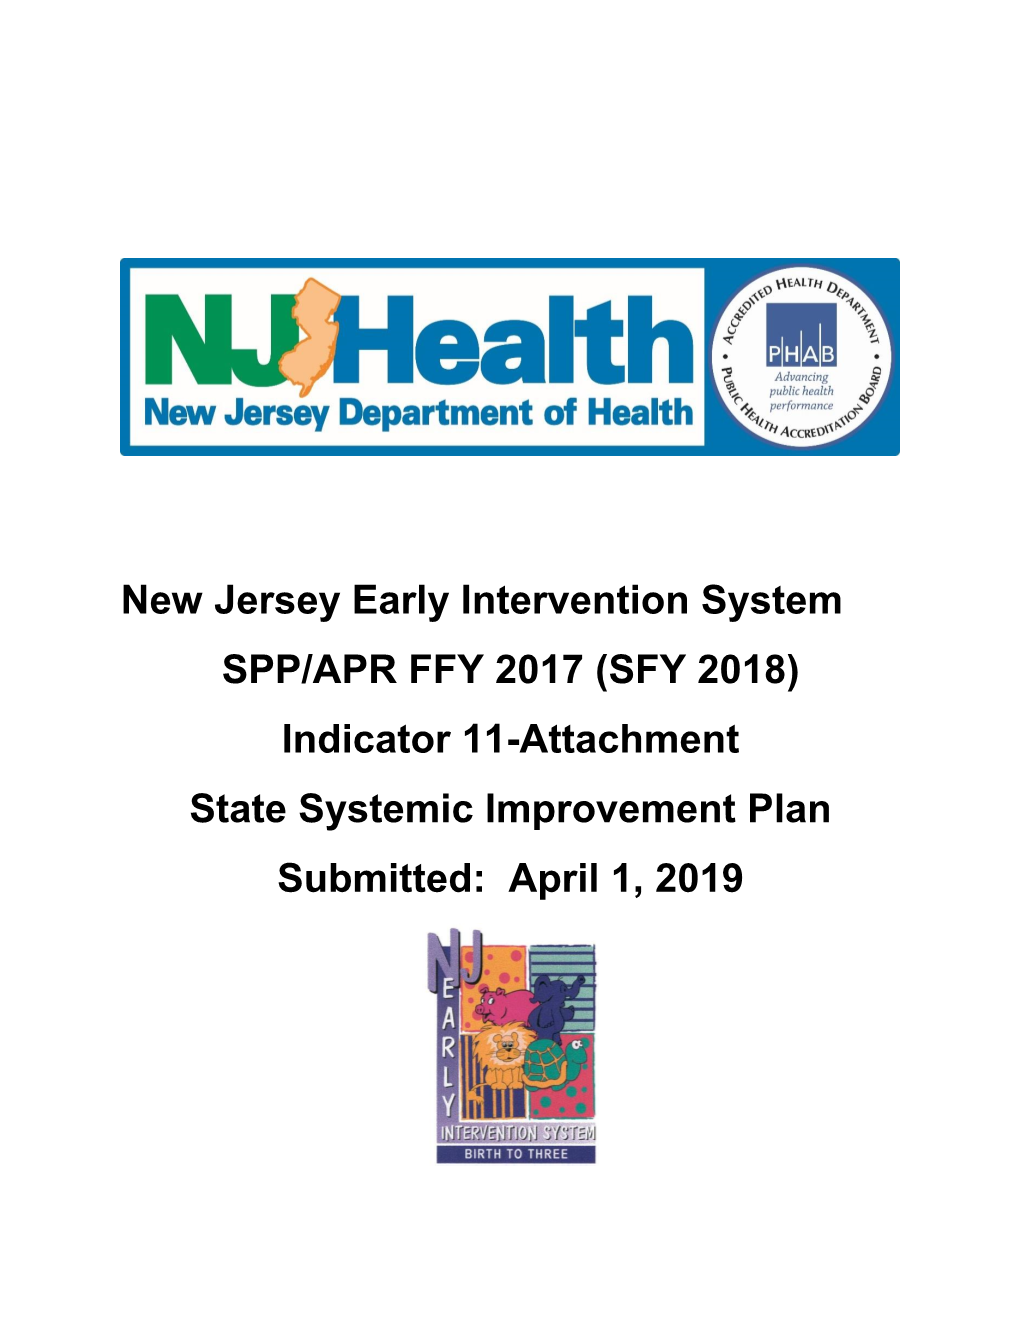 New Jersey Early Intervention System SPP/APR FFY 2017 (SFY 2018) Indicator 11-Attachment State Systemic Improvement Plan Submitted: April 1, 2019